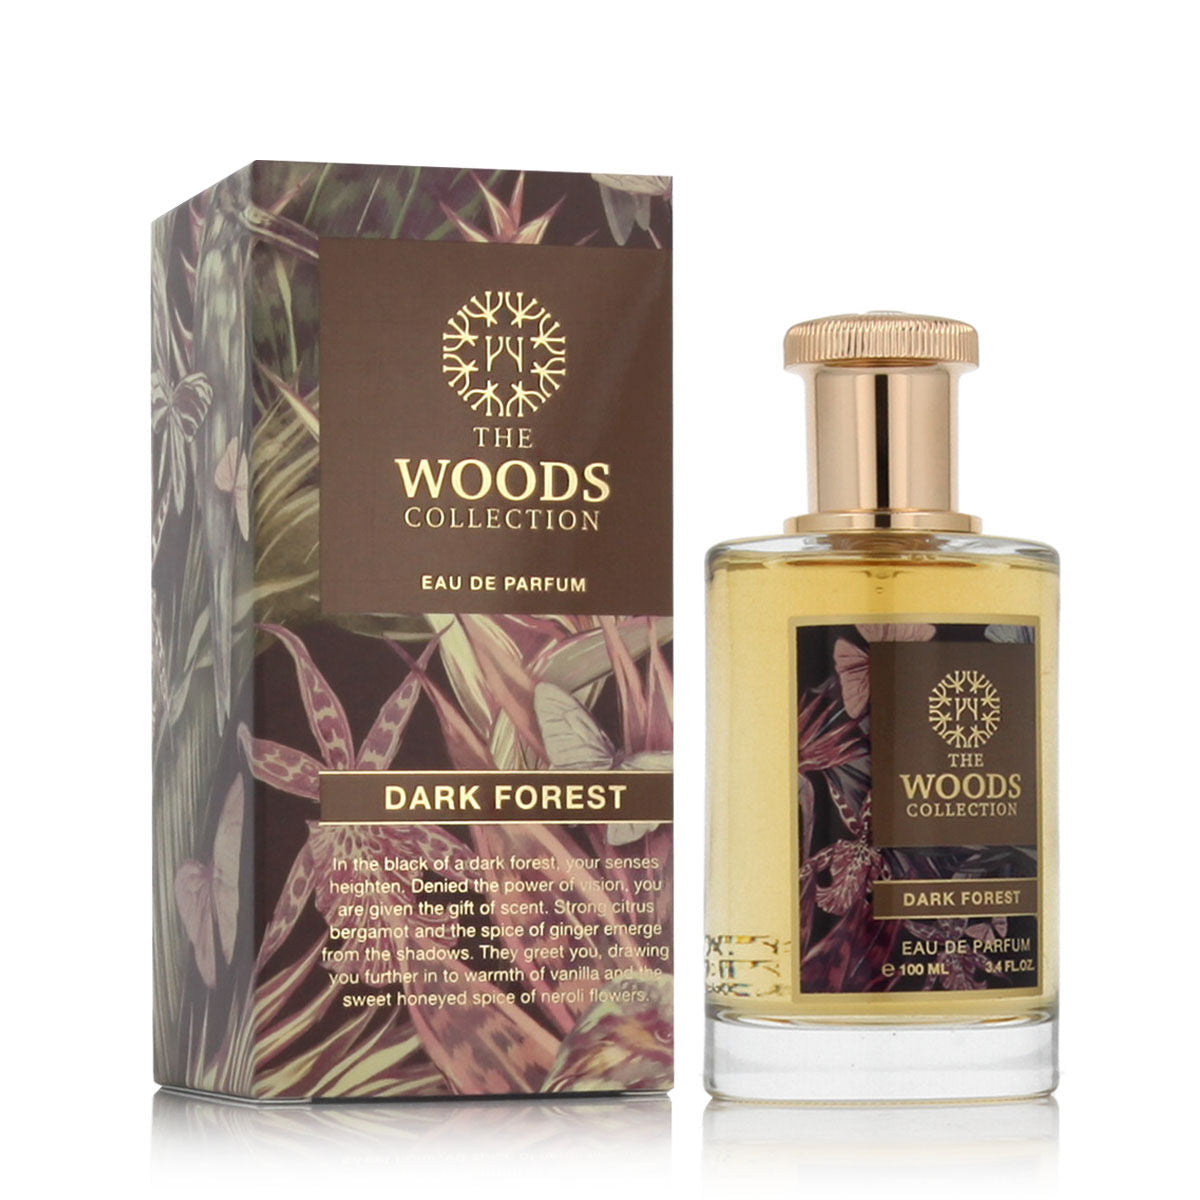 Perfume Unisex The Woods Collection EDP 100 ml Dark Forest